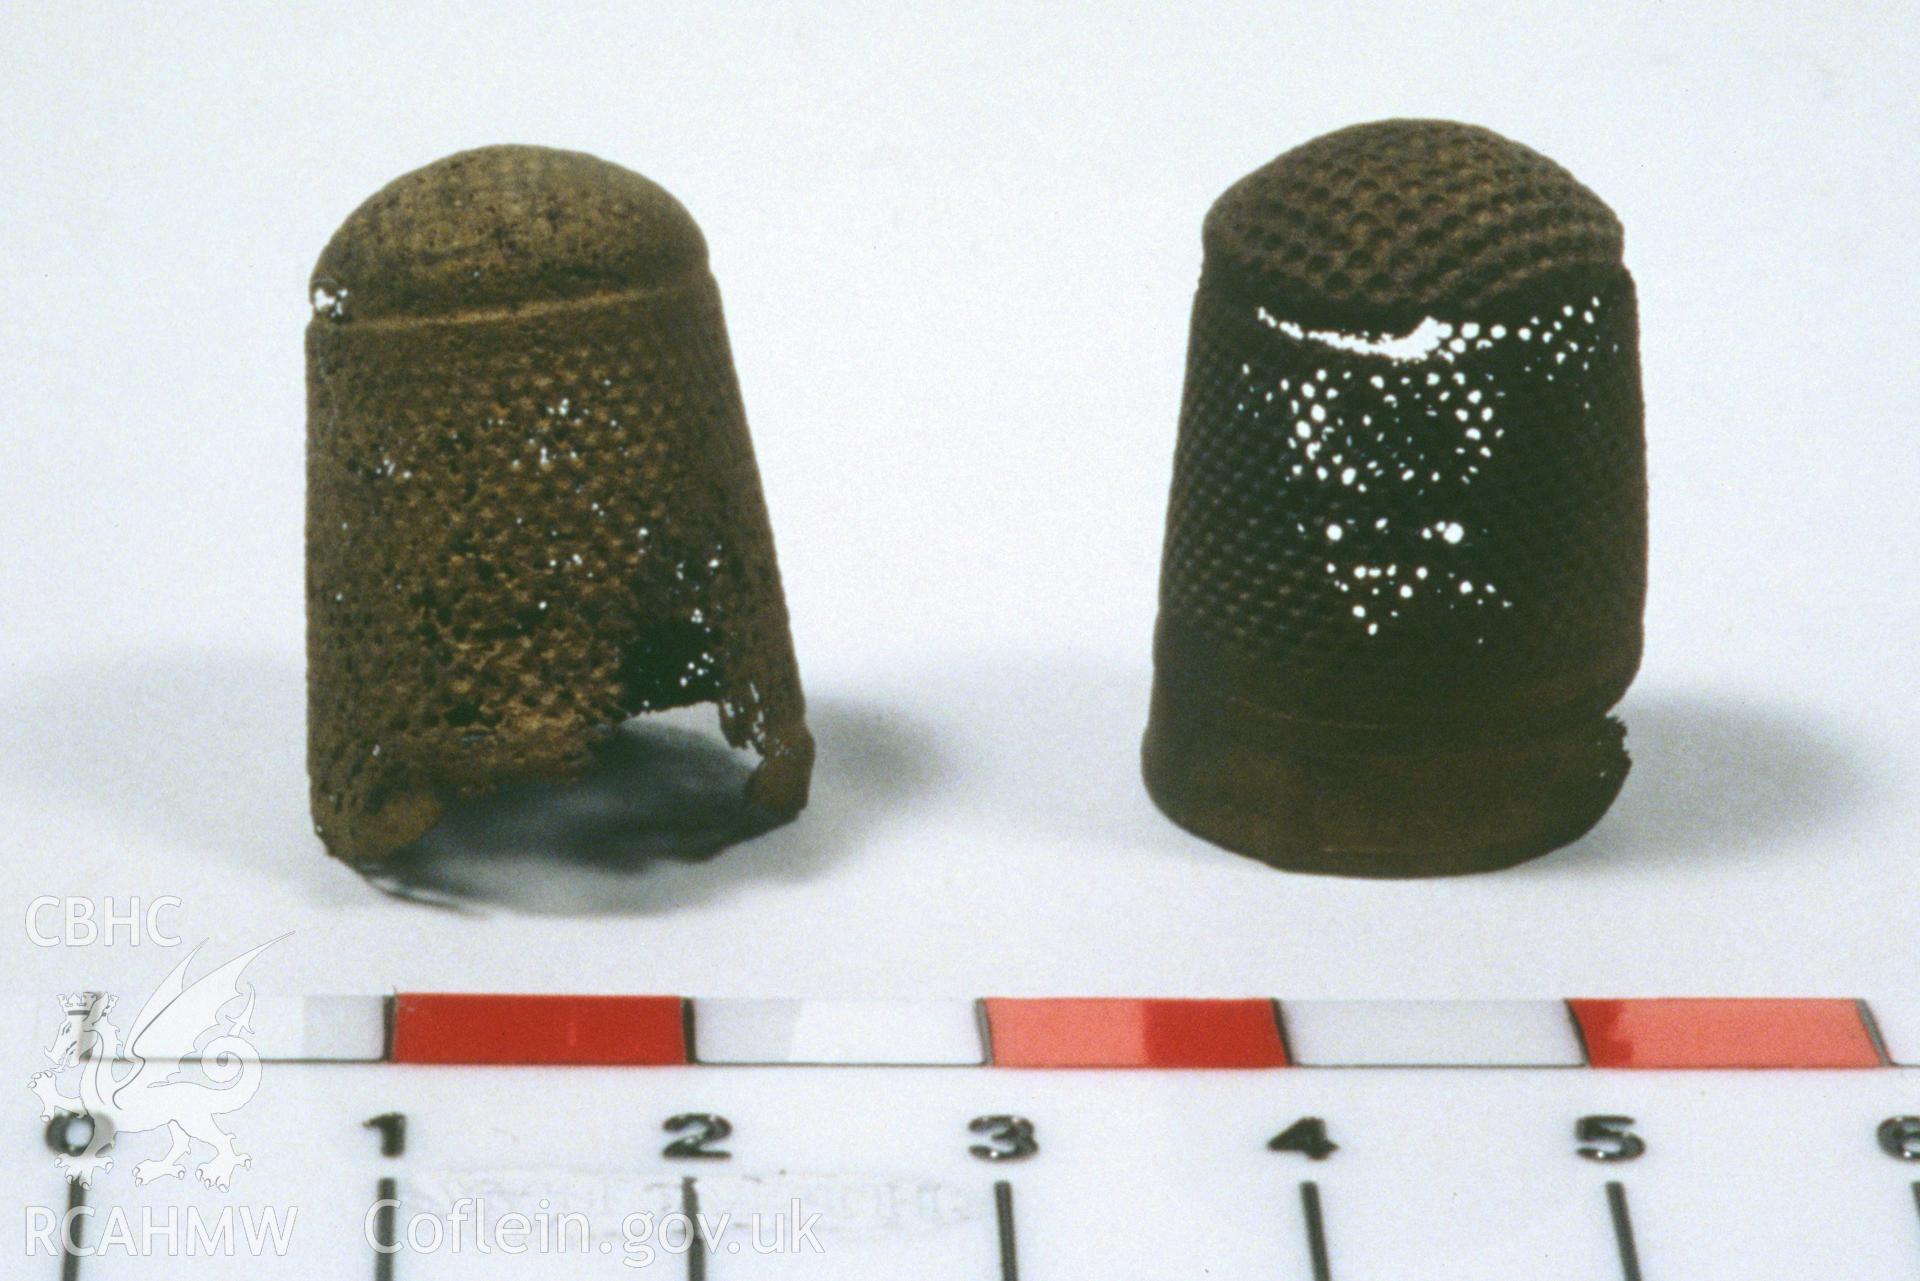 Colour slide showing find from site, a pair of thimbles, from a survey of the Mary designated shipwreck, courtesy of National Museums, Liverpool (Merseyside Maritime Museum)